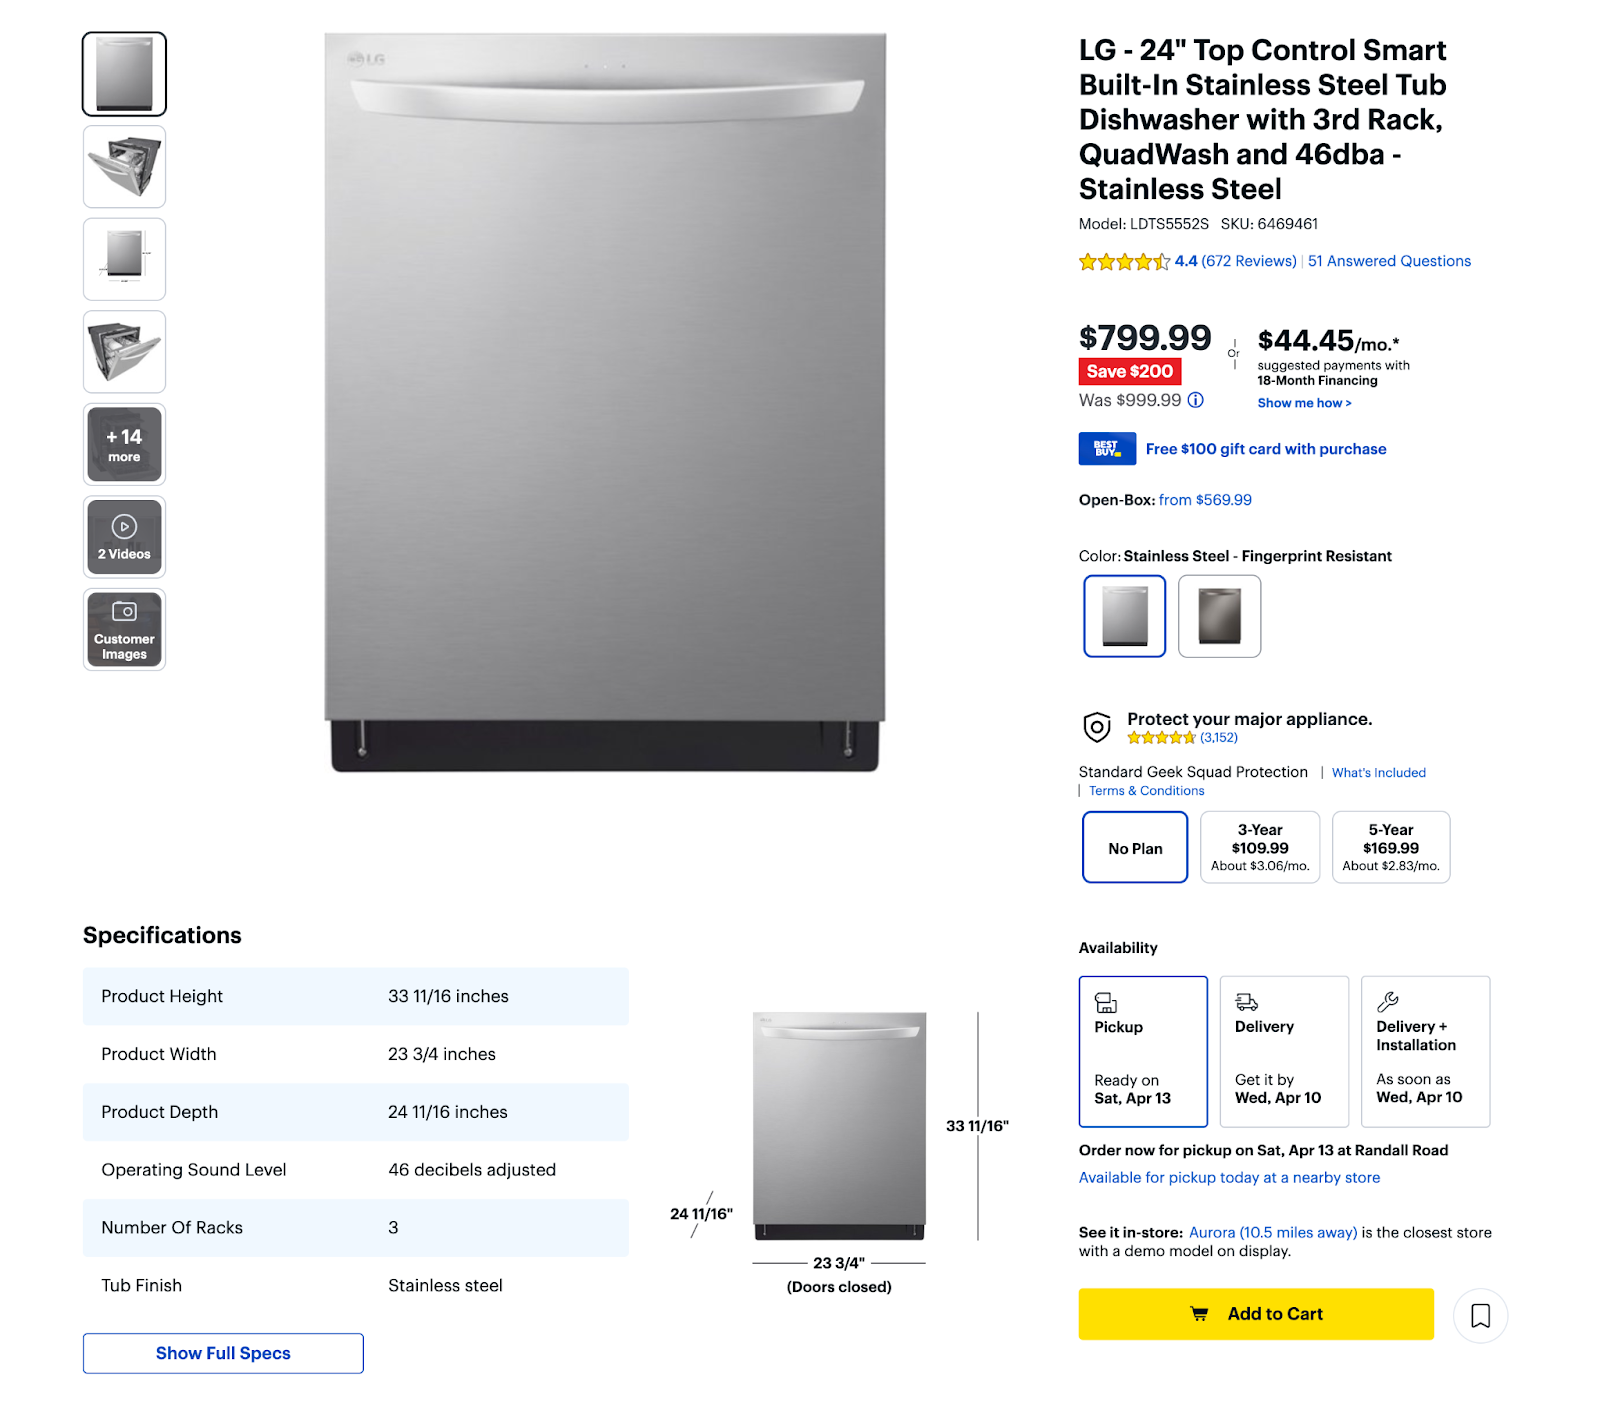 Best Buy product page for built-in dishwasher detailing product info including specifications